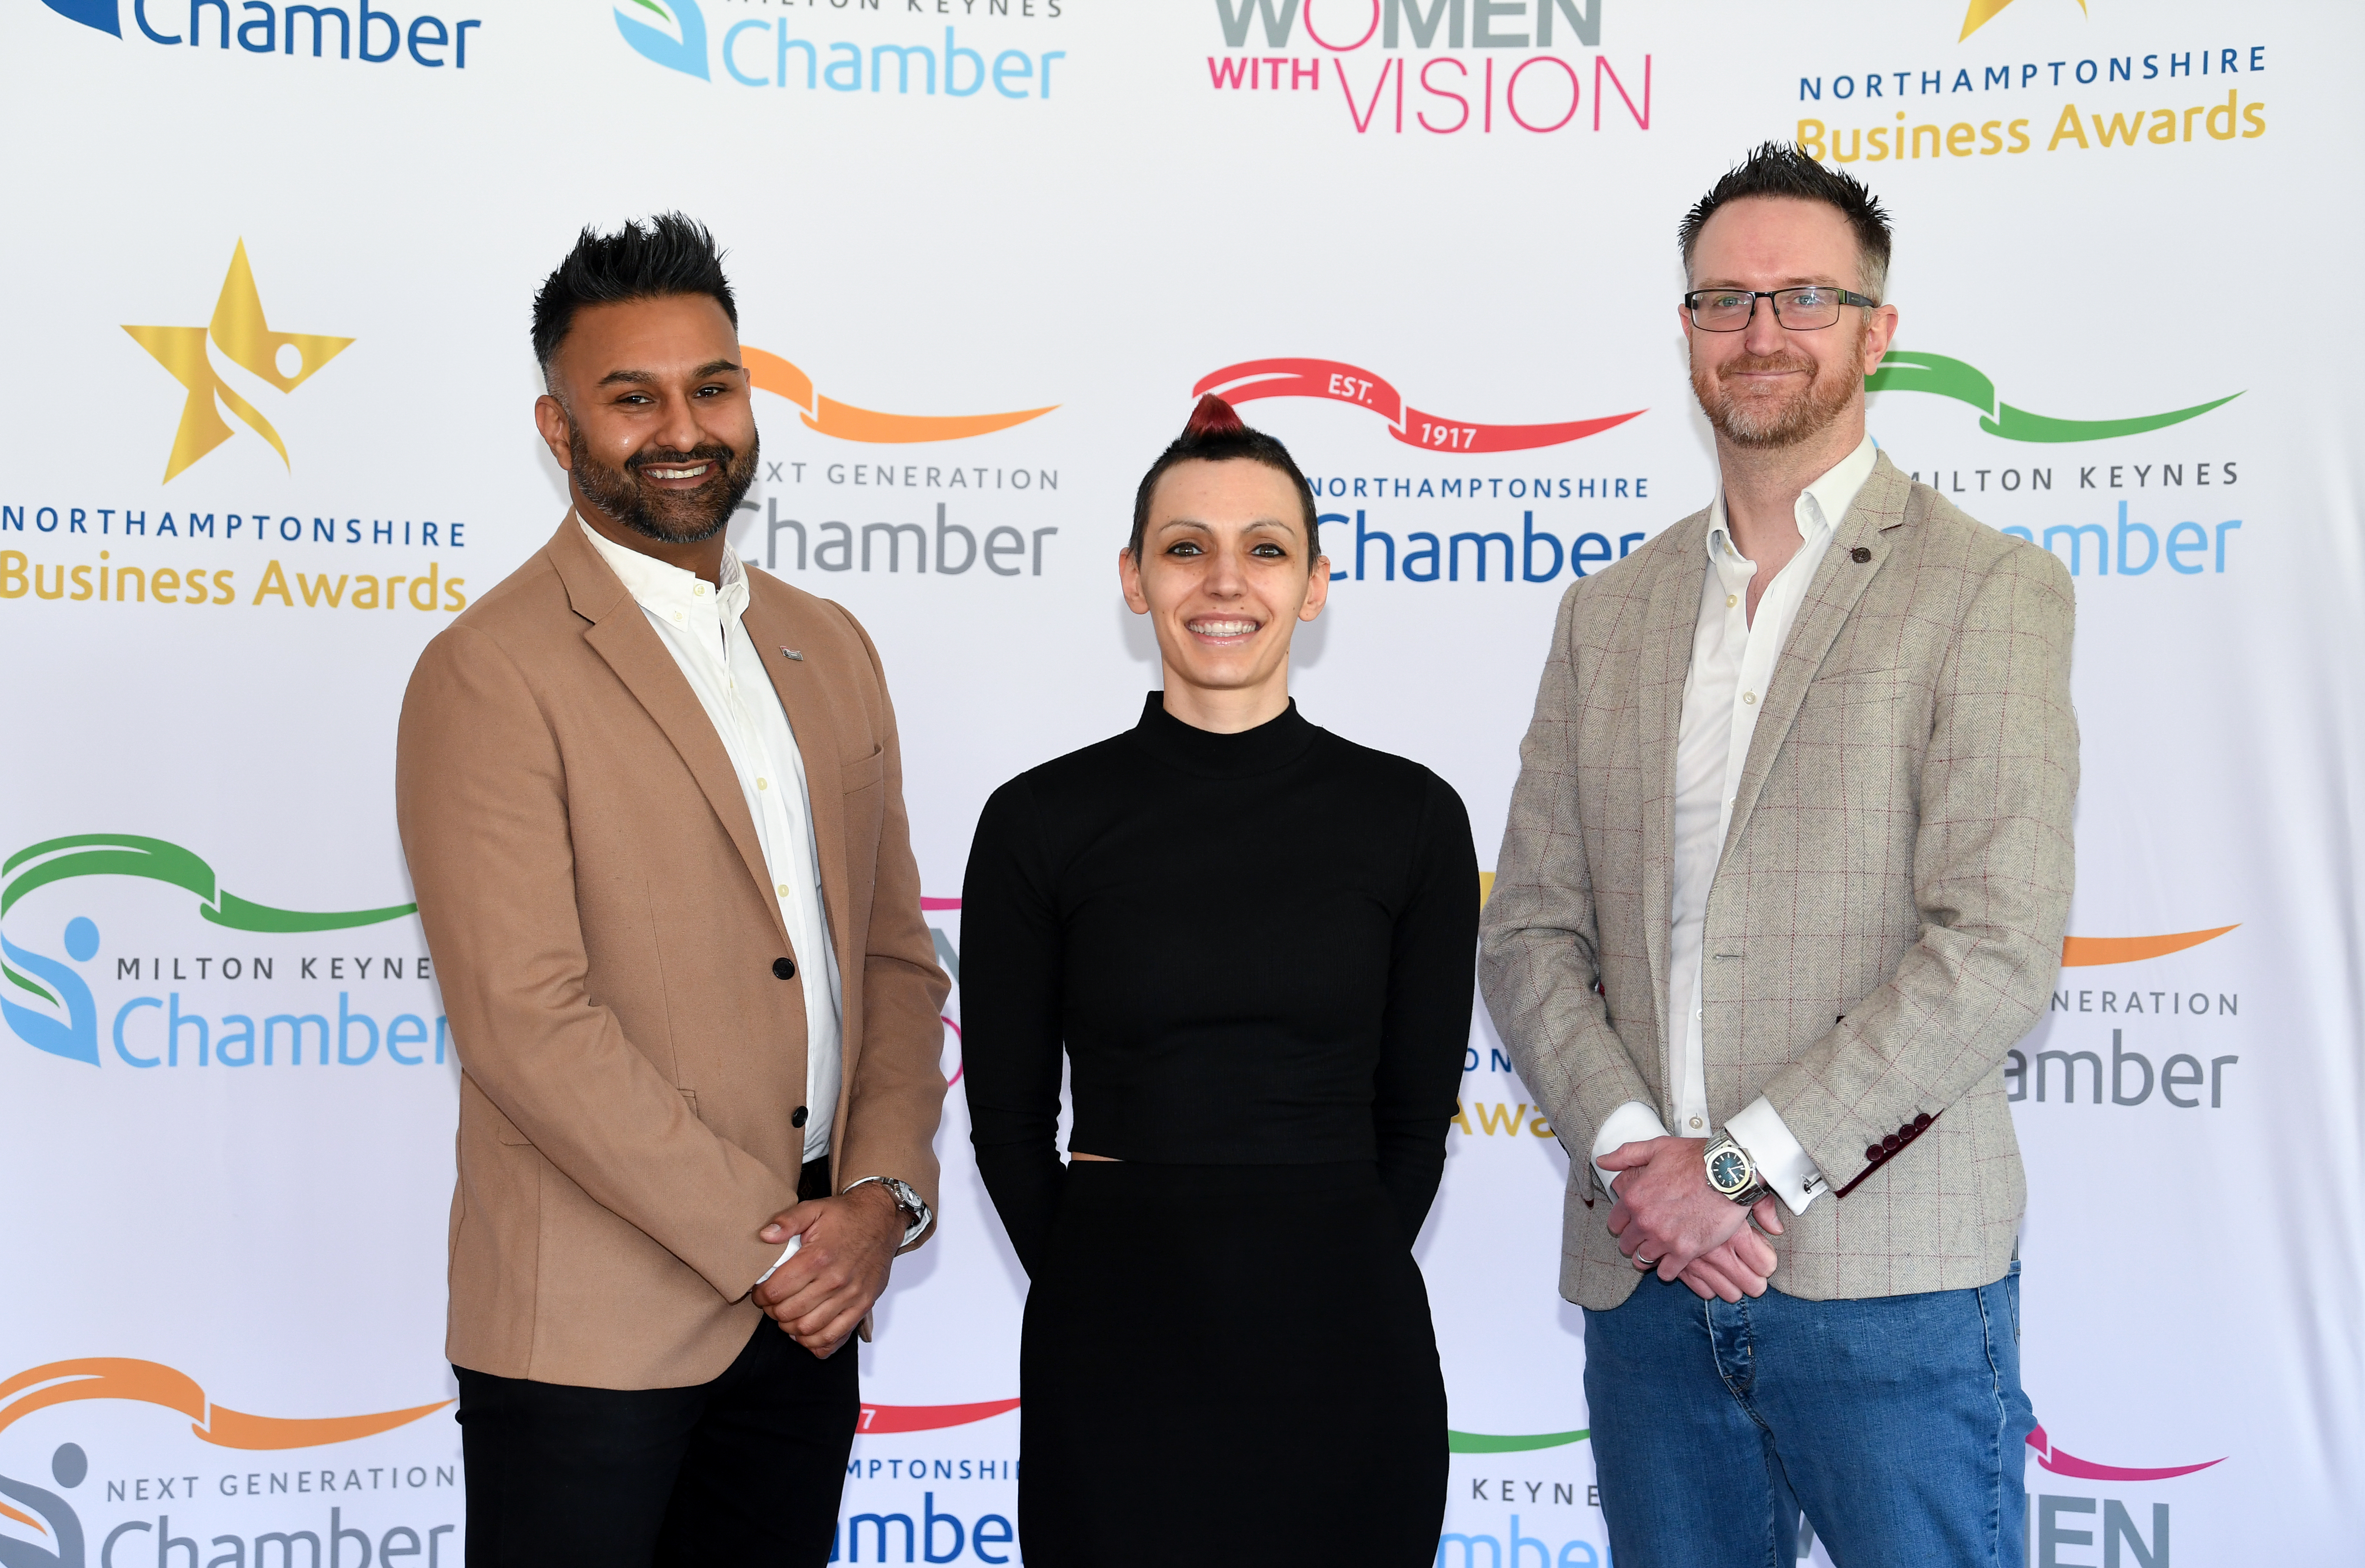 Chambers of Commerce appoint two vice presidents